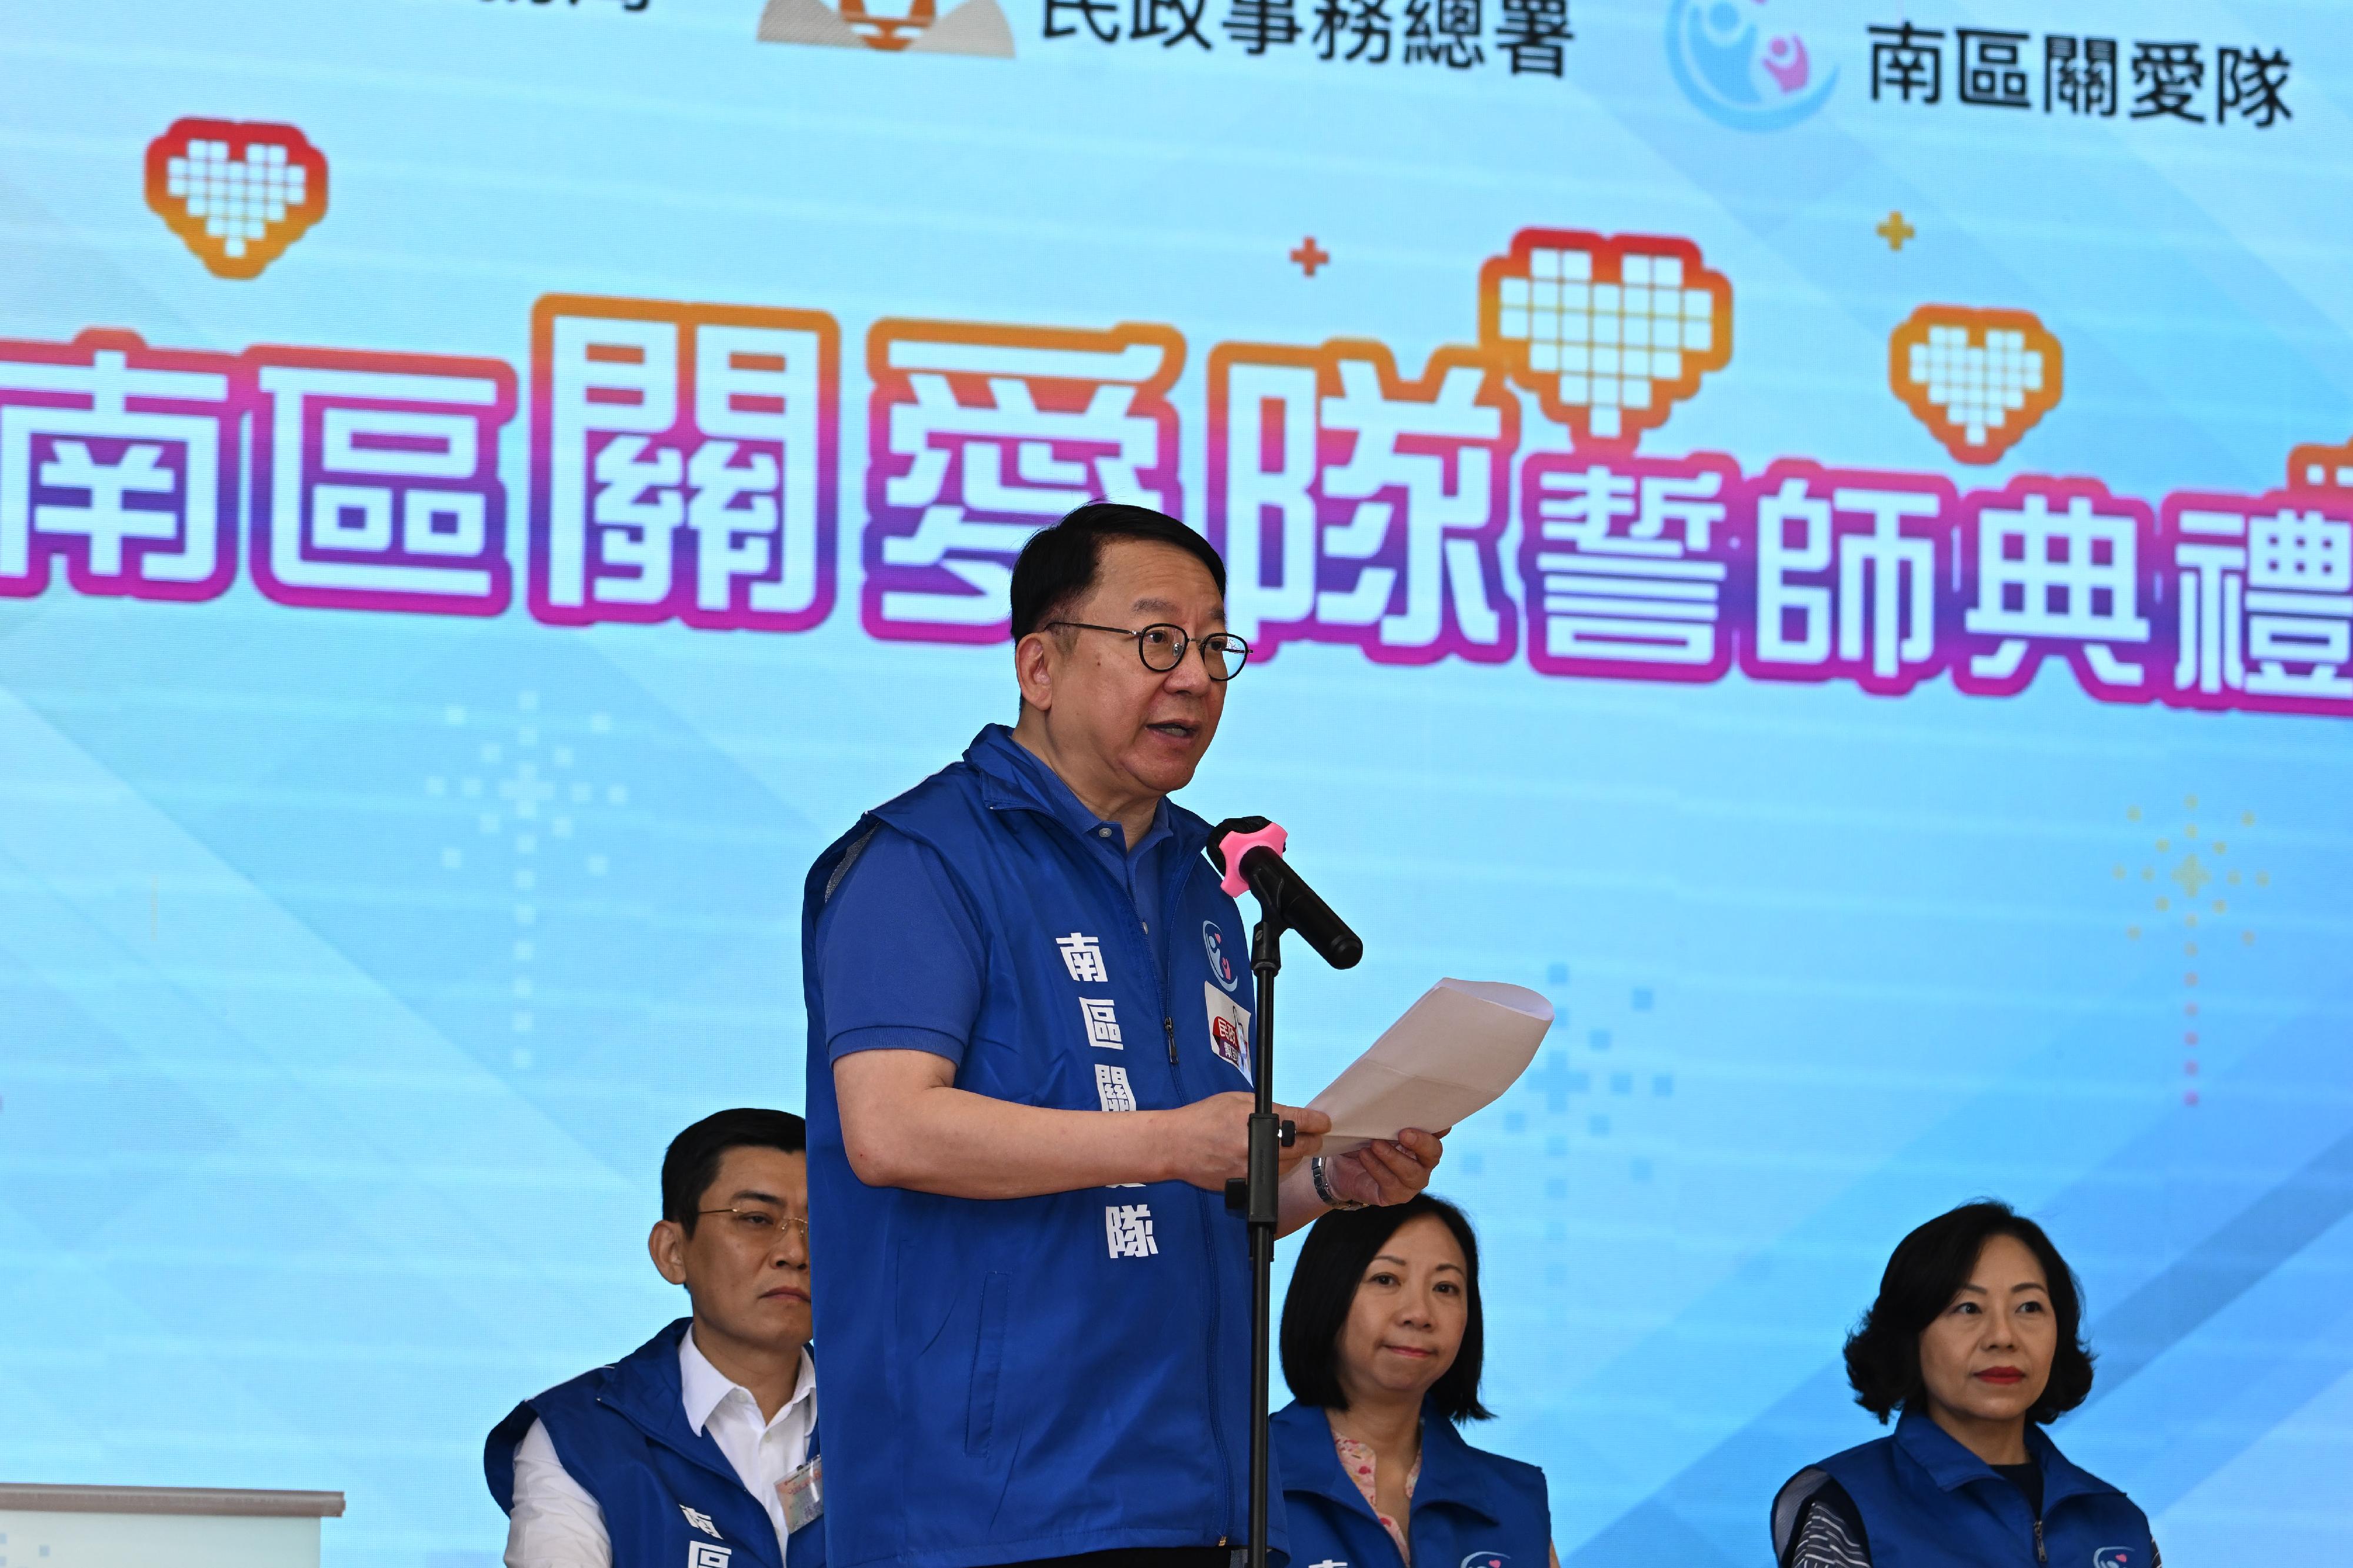 The Chief Secretary for Administration, Mr Chan Kwok-ki, speaks at the pledging ceremony of Care Teams in Southern District today (April 30).